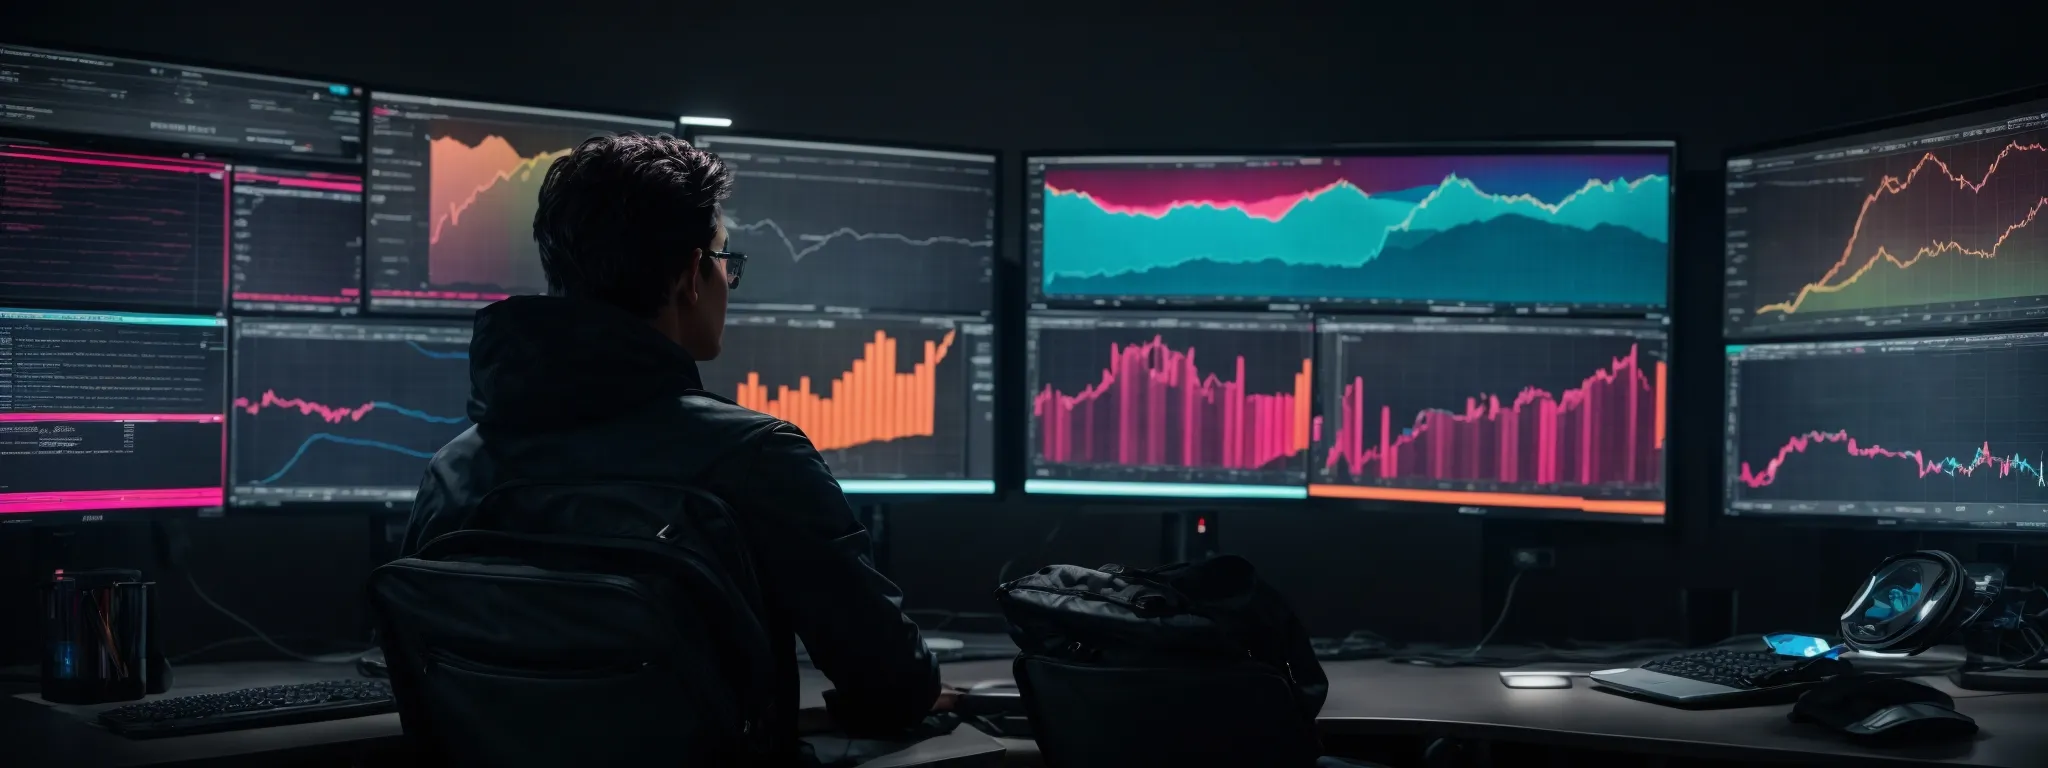 a person sits in front of dual monitors, displaying colorful analytics graphs and keyword performance metrics.